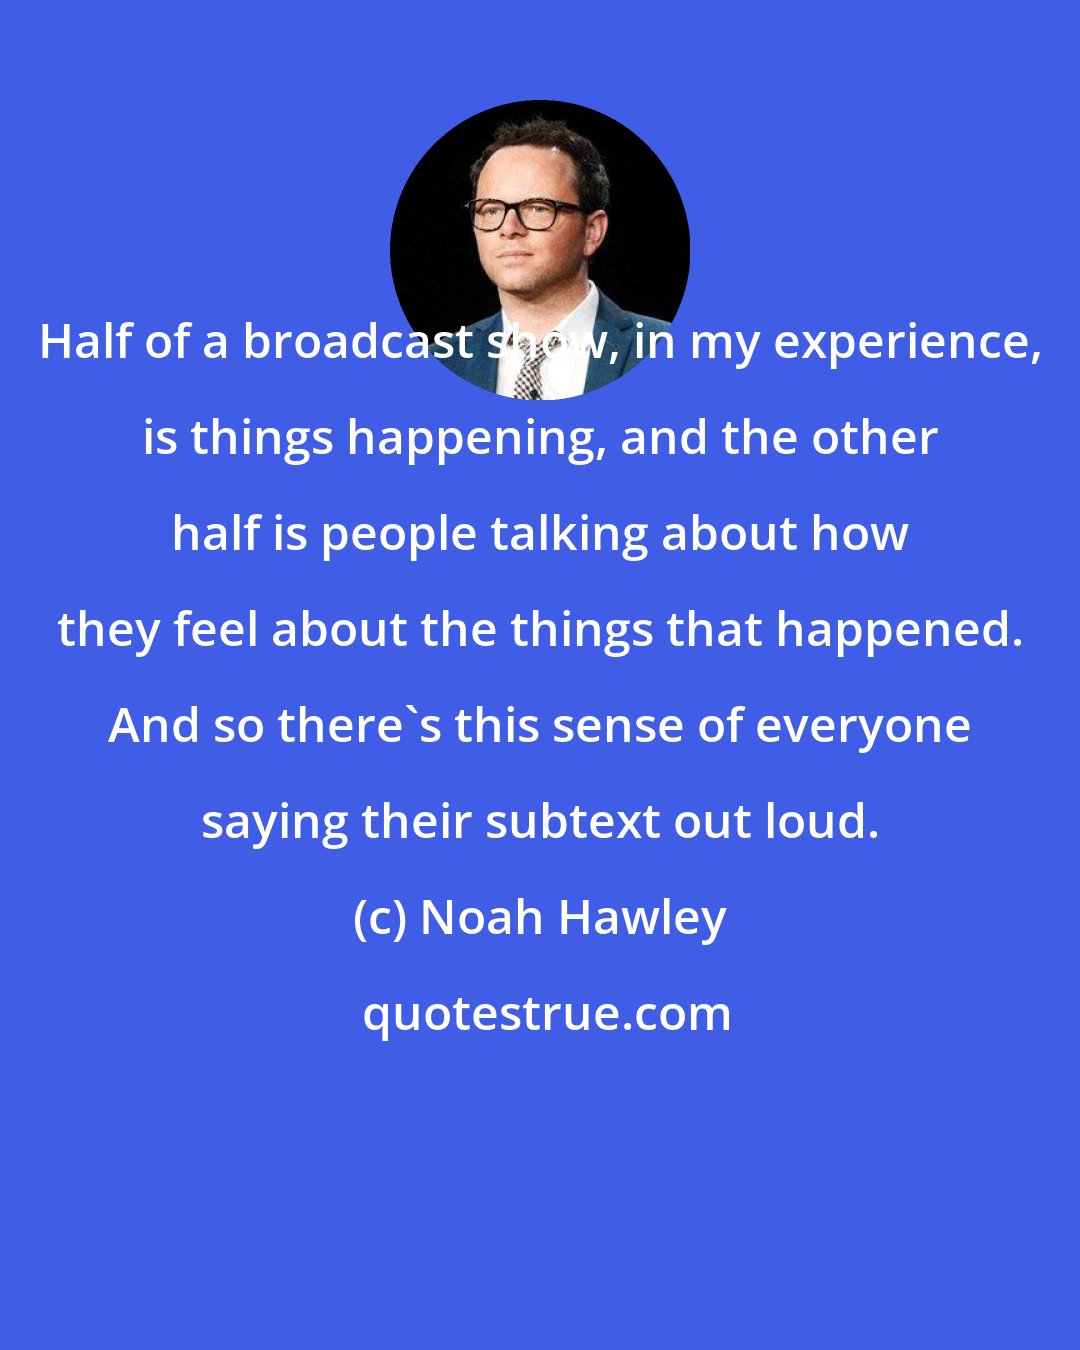 Noah Hawley: Half of a broadcast show, in my experience, is things happening, and the other half is people talking about how they feel about the things that happened. And so there's this sense of everyone saying their subtext out loud.